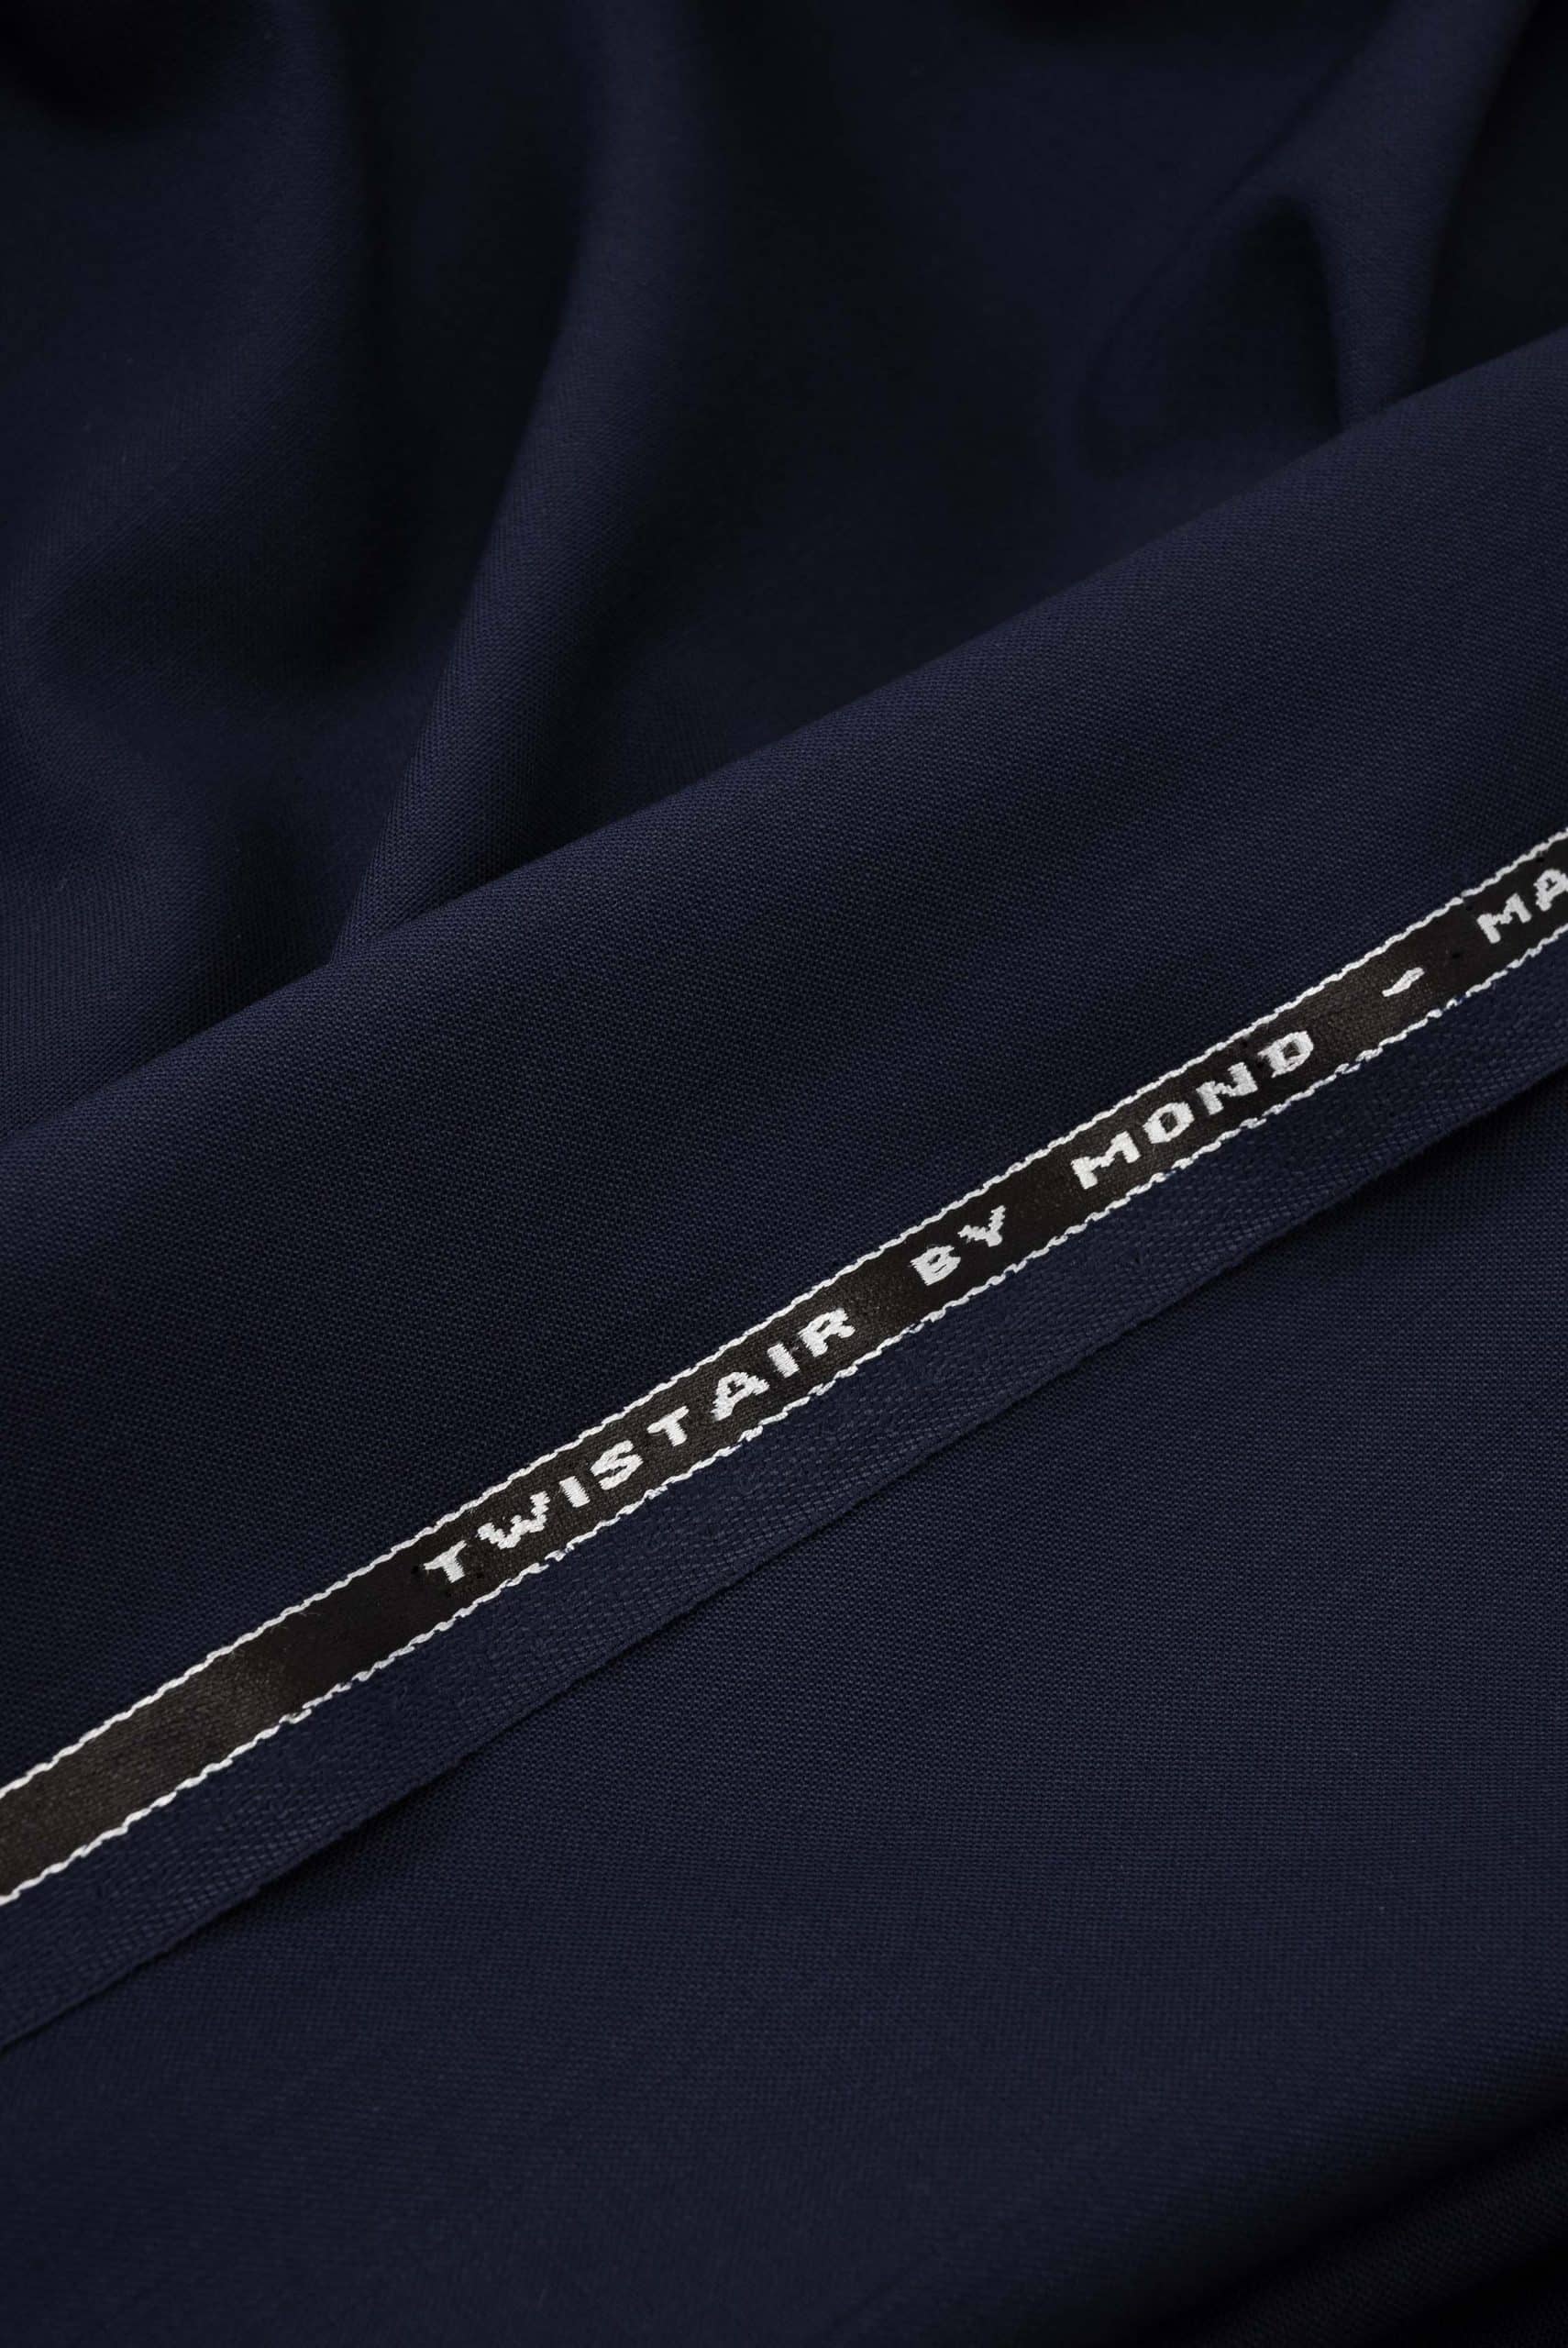 twistair suiting fabric by mond of copenhagen